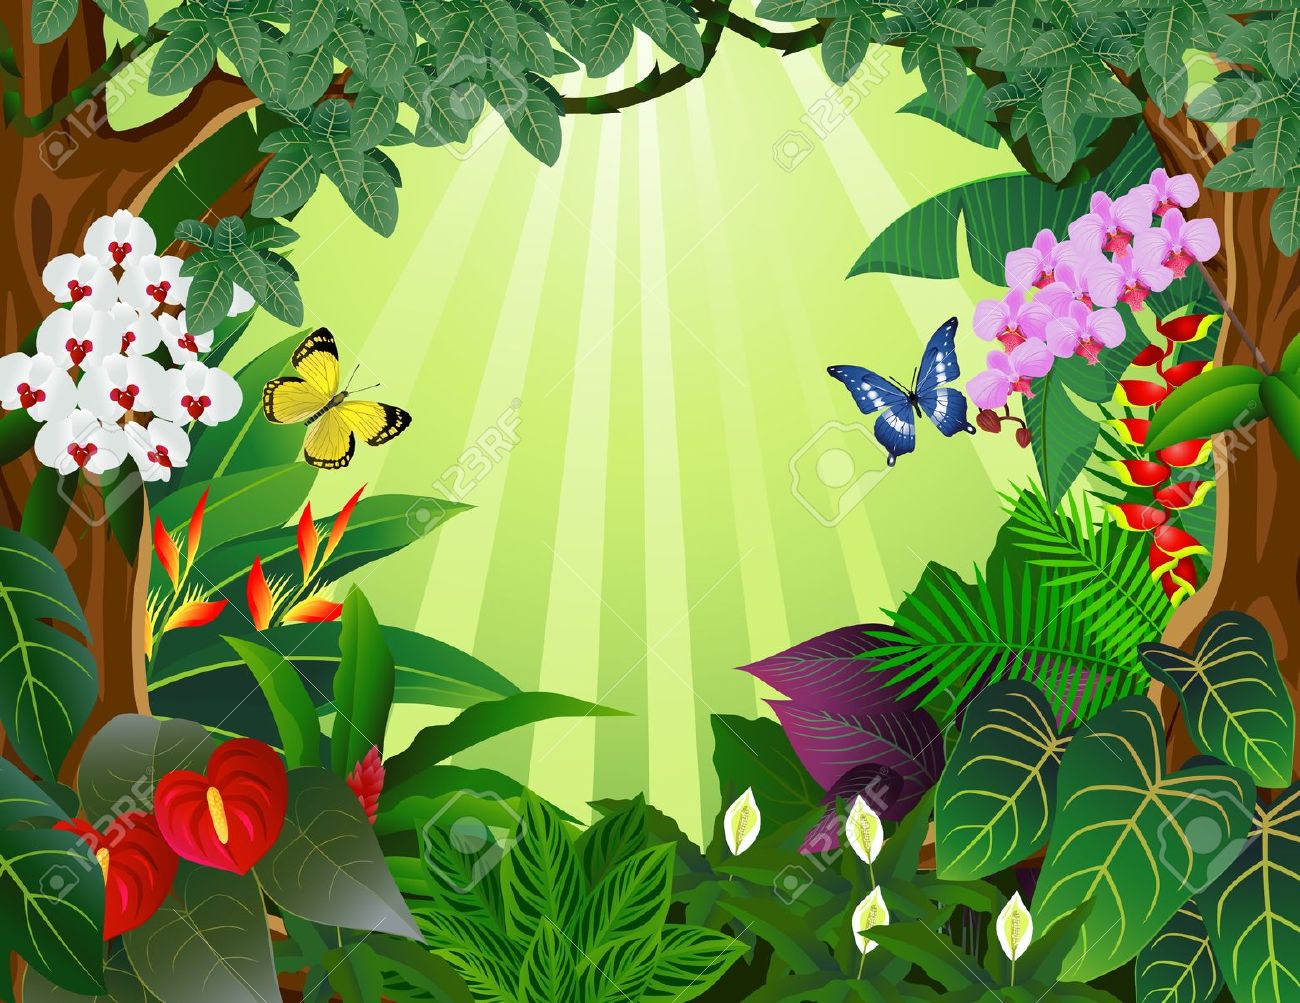 Tropical Forest Background St